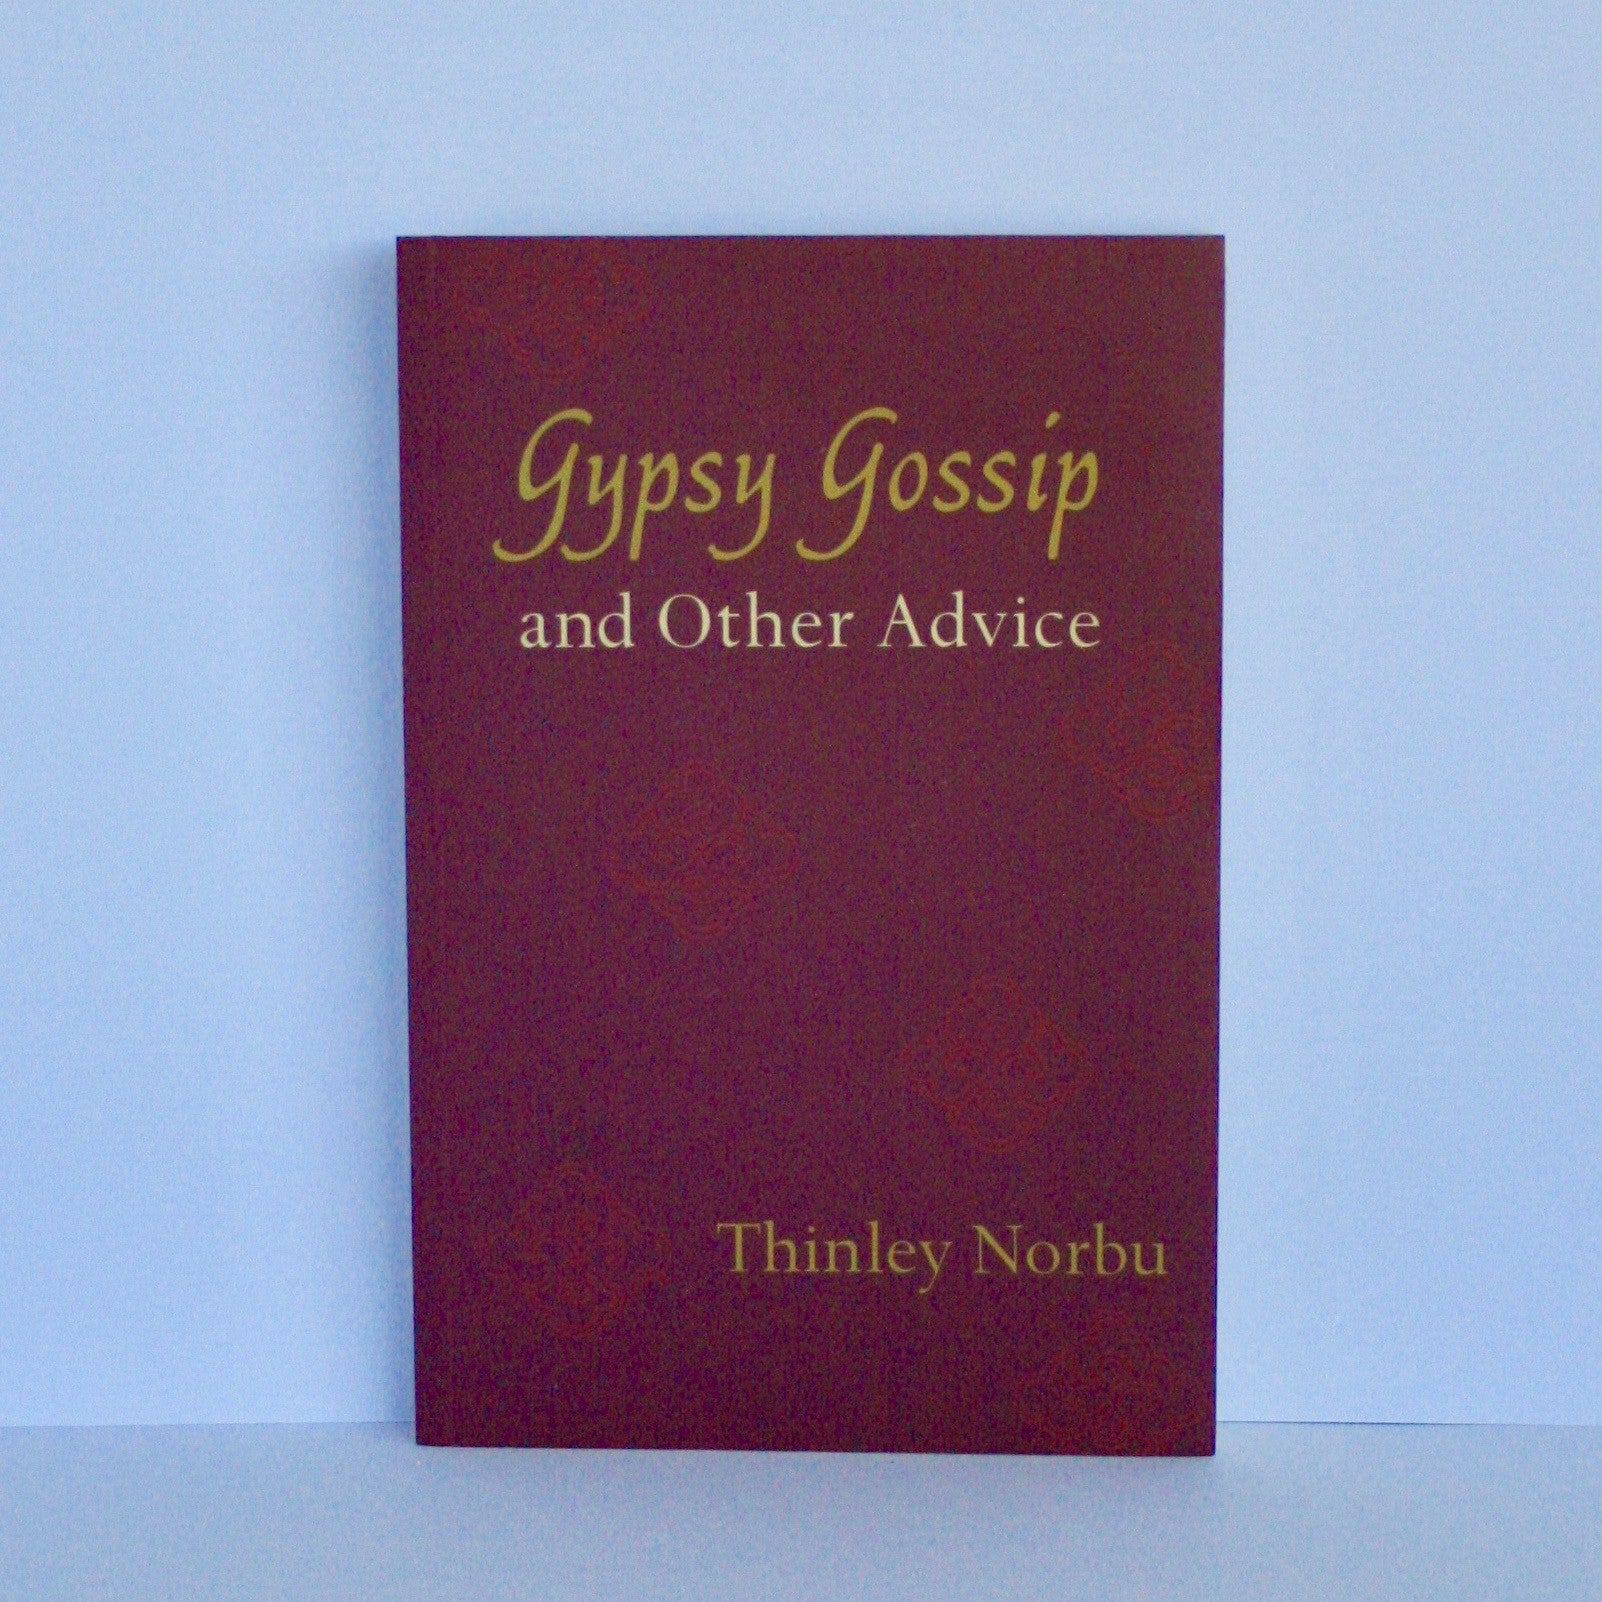 Gypsy Gossip and Other Advice by Thinley Norbu